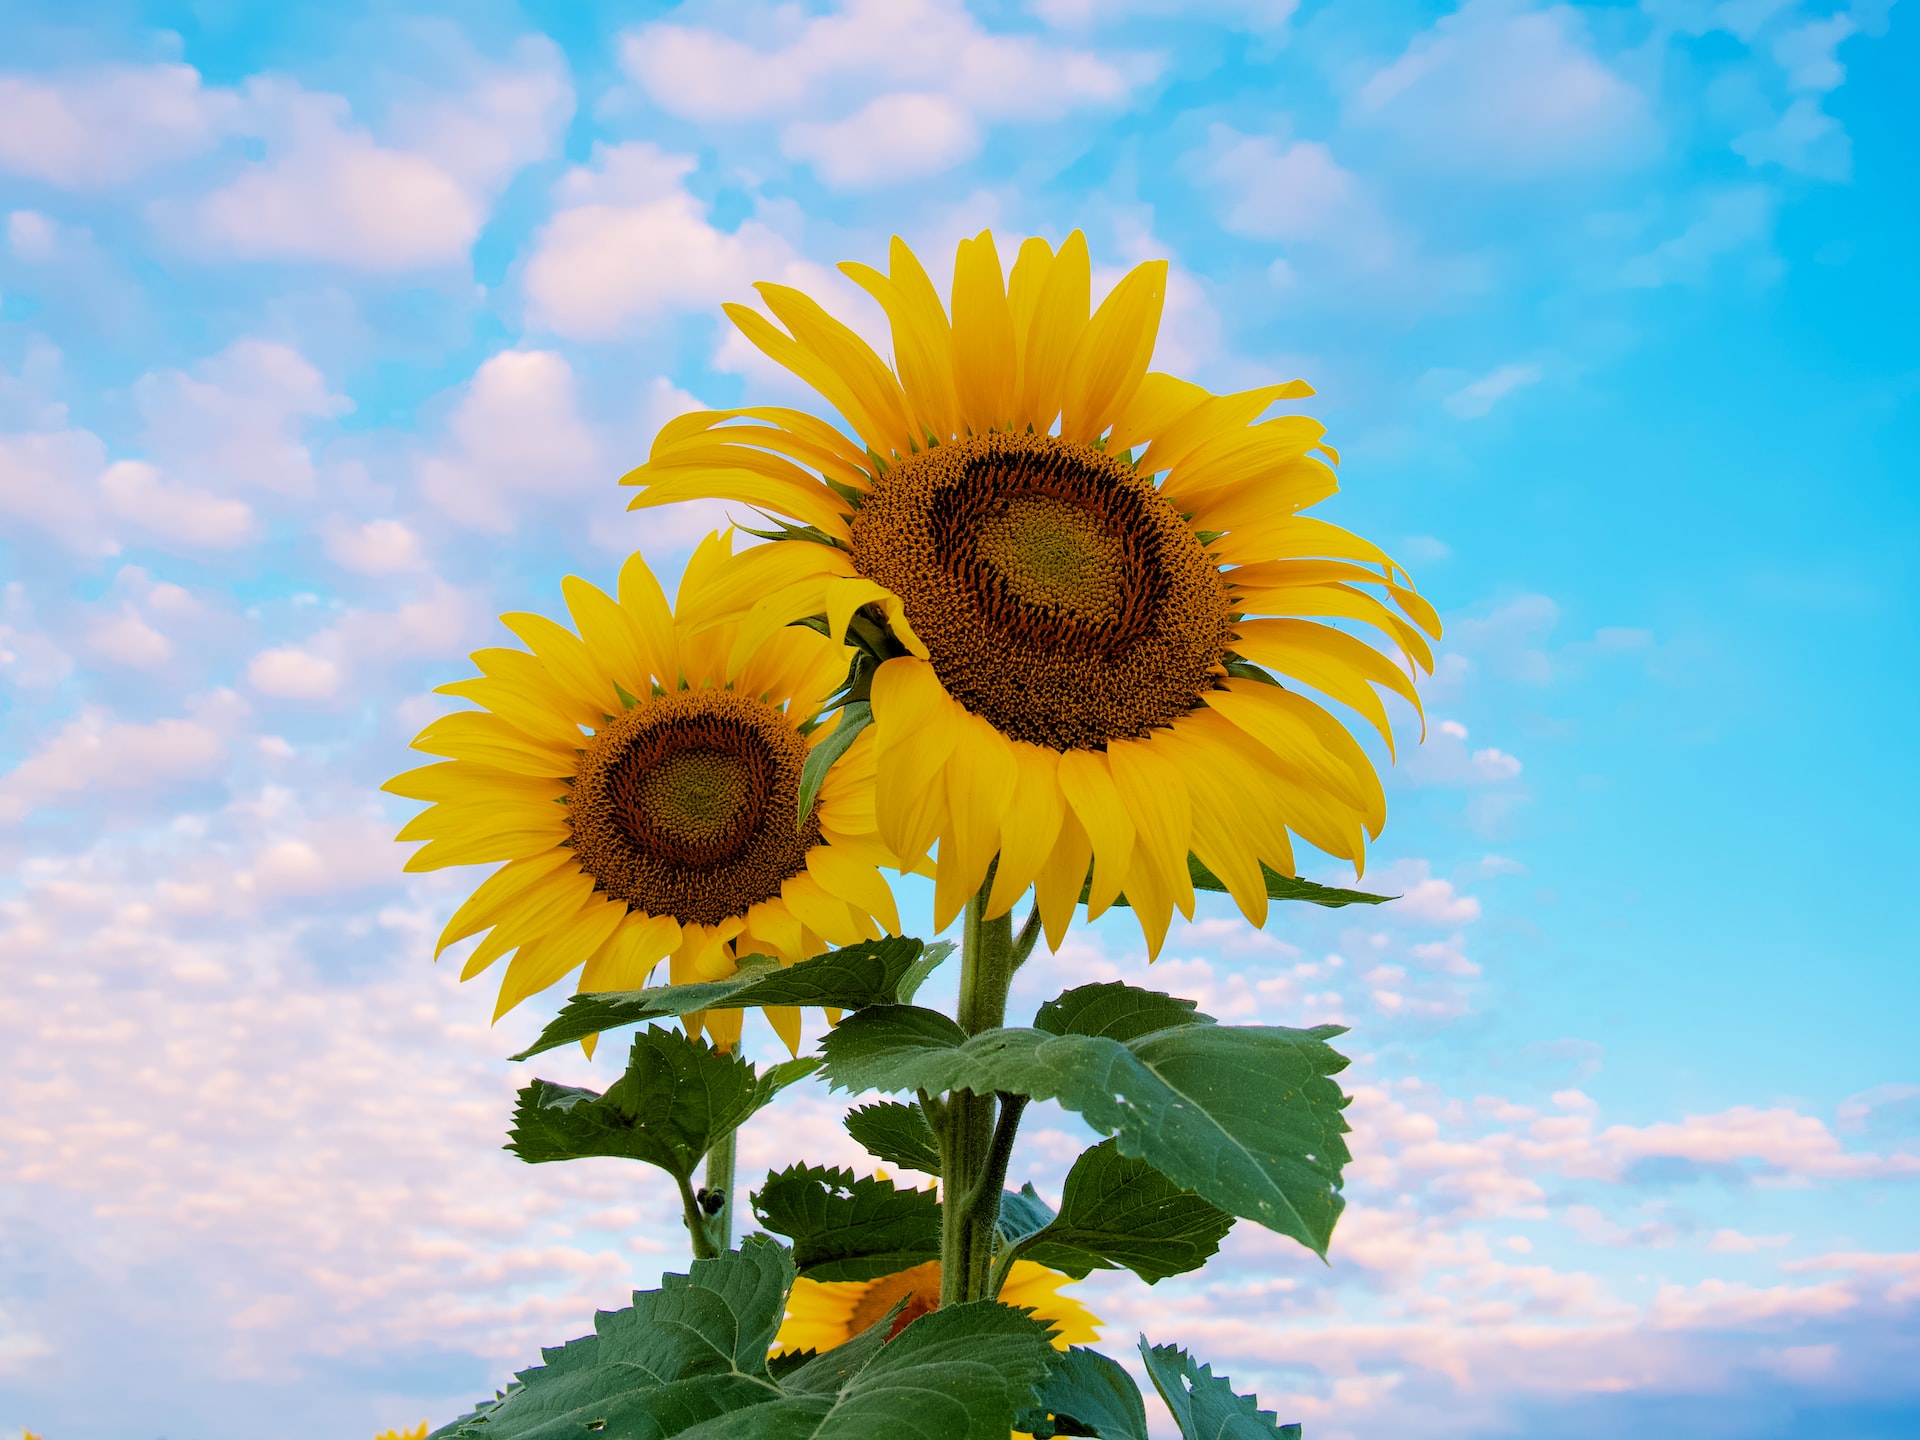 sunflowers with the sky as a backdrop